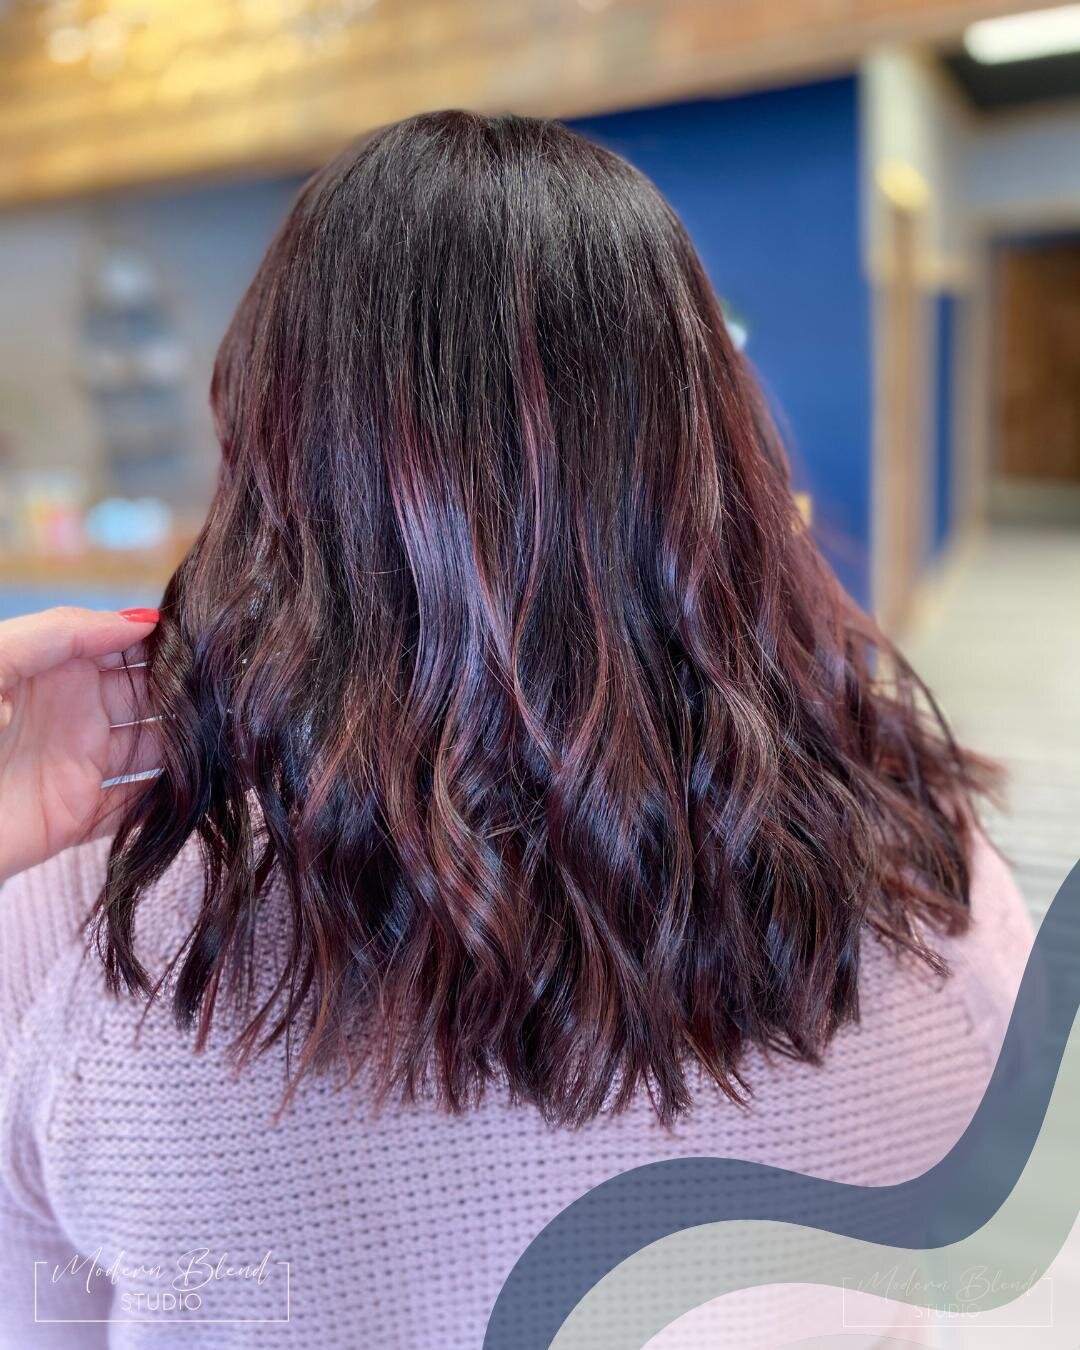 Summer hair isn't just about the blondes! 🍒 This color is 🔥 Hannah is fully booked for the next couple months so make sure to make your hair appointment asap! Call us at (810) 652-6069📲⁠
.⁠
.⁠
.⁠
.⁠
.⁠
#modernblendstudio #hairpainting #modernsalon